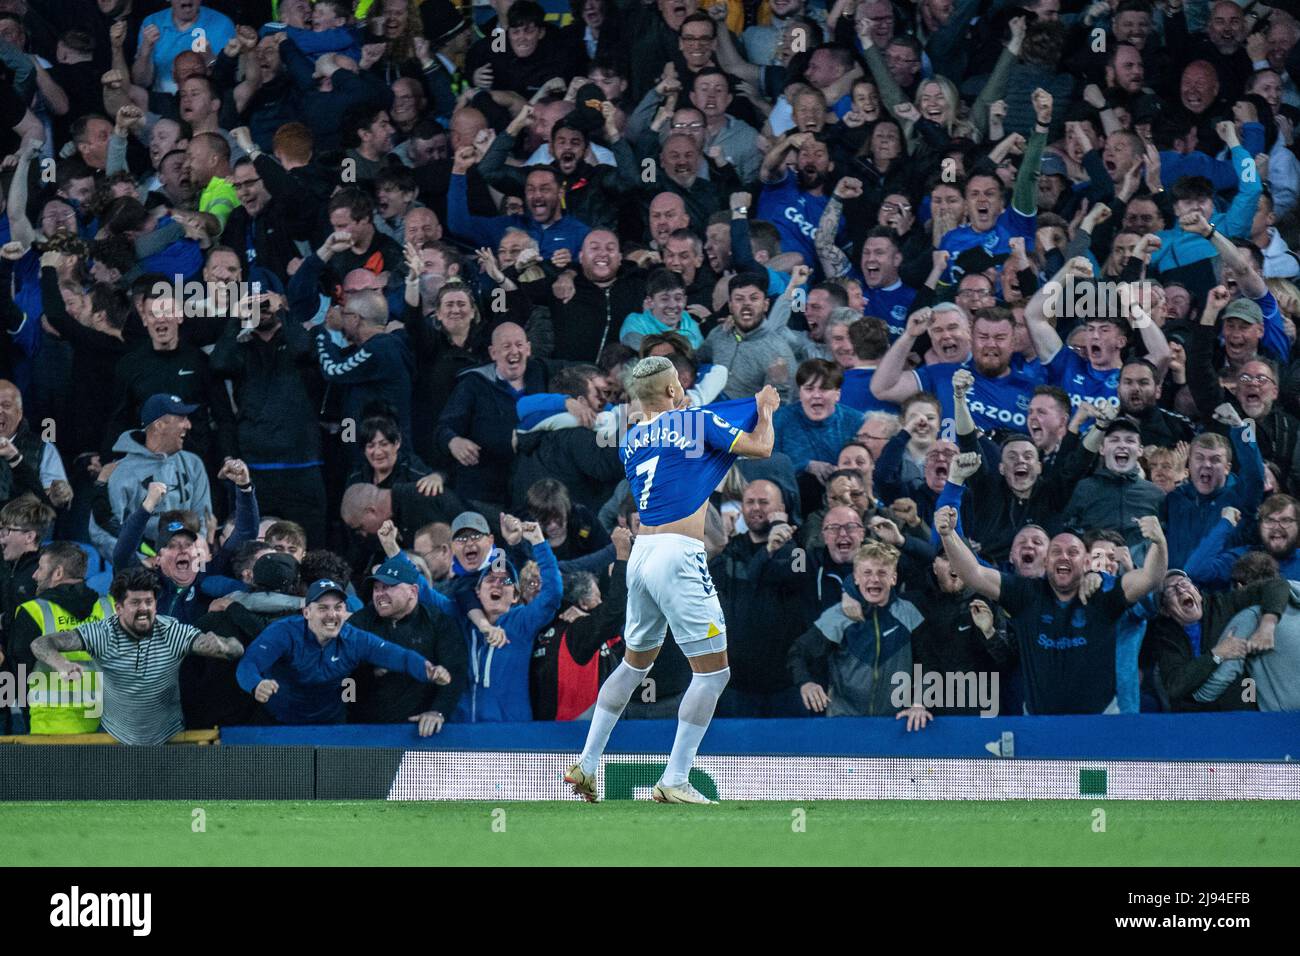 LIVERPOOL, ENGLAND - MAY 19: Richarlison of Everton celebrates after scoring goal during the Premier League match between Everton and Crystal Palace at Goodison Park on May 19, 2022 in Liverpool, United Kingdom. (Photo by Sebastian Frej) Stock Photo